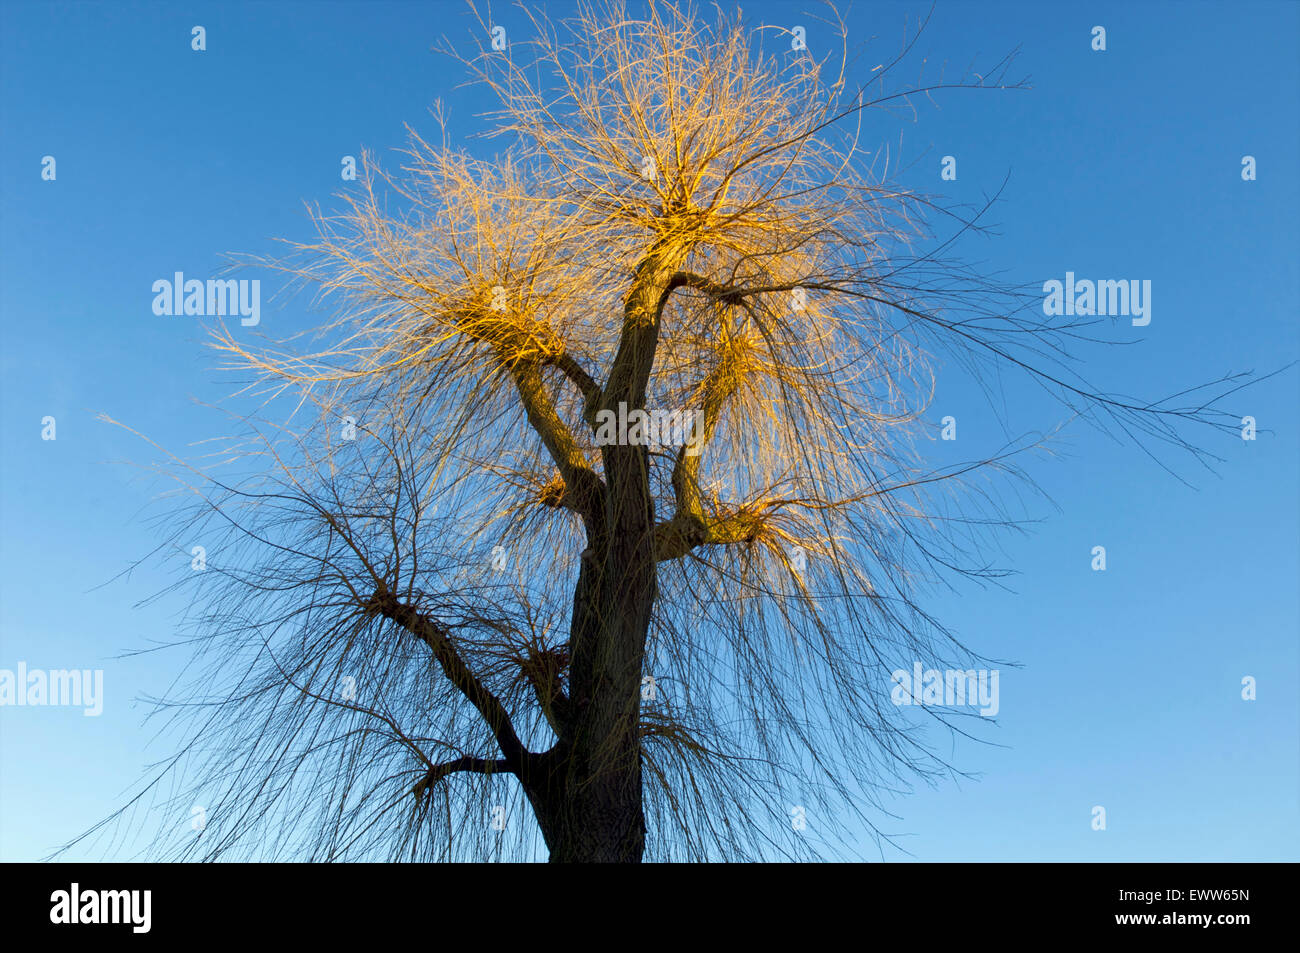 Willow tree partly in the light from the sun during a sunset Stock Photo